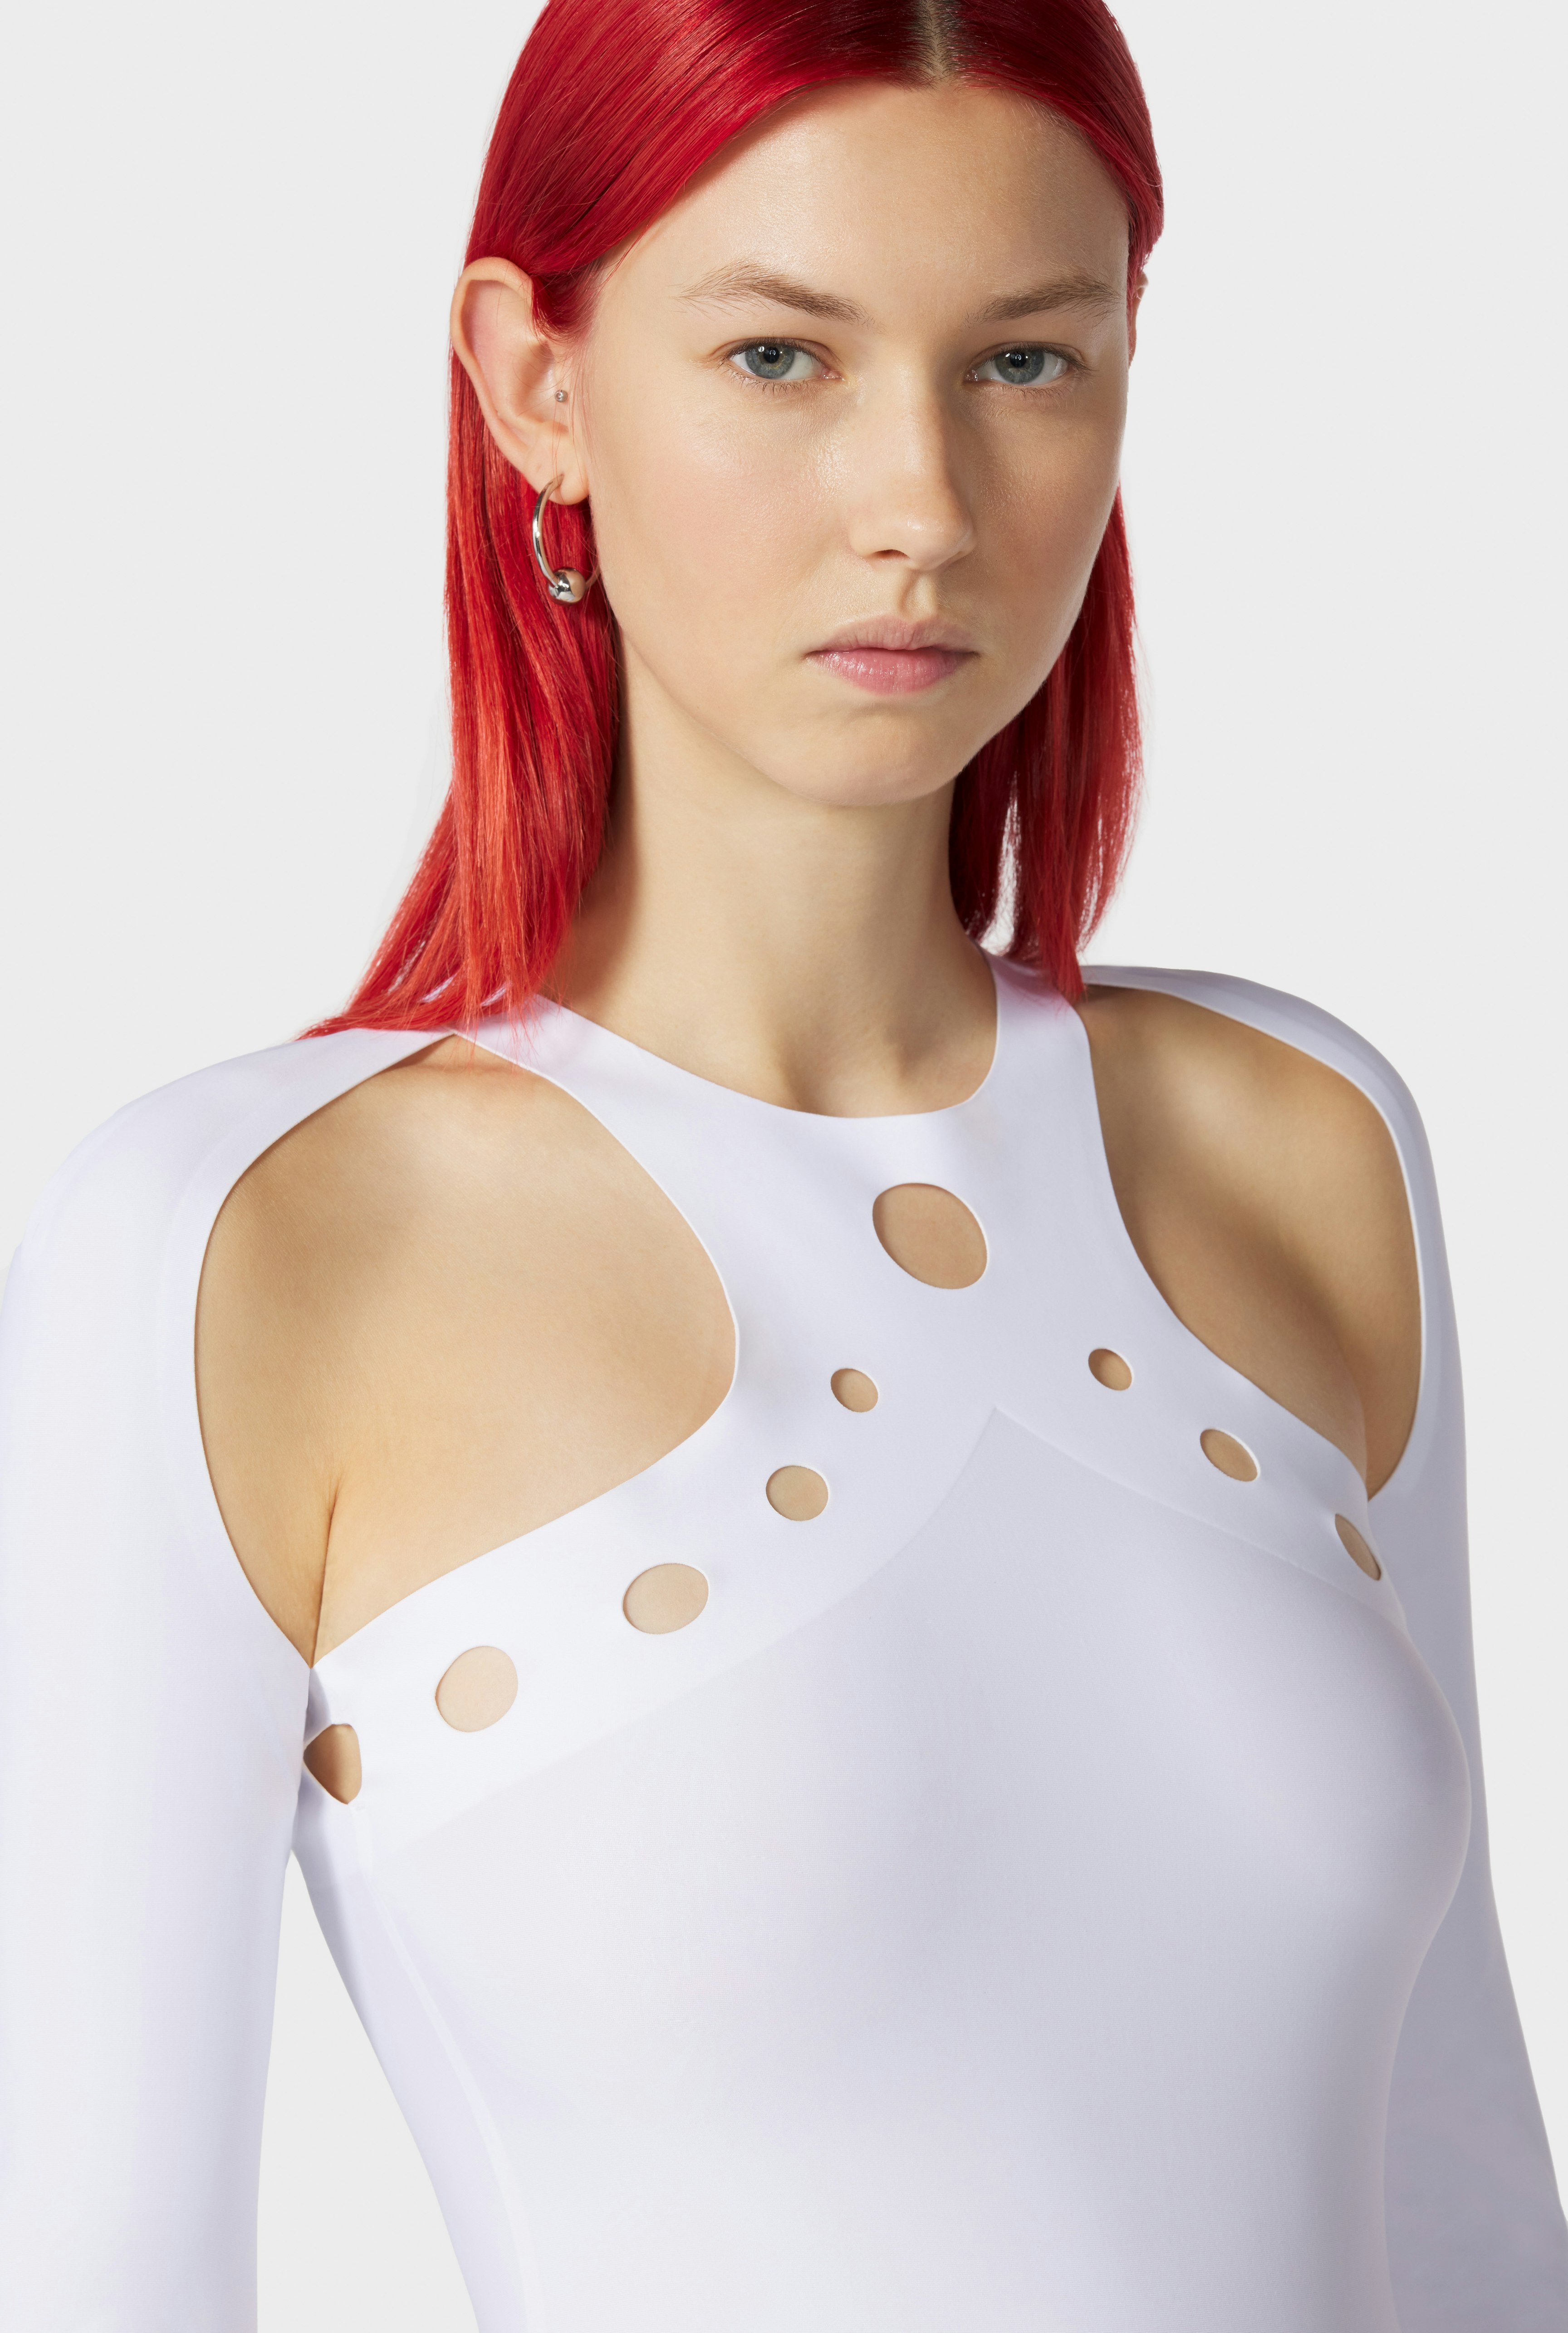 The White Perforated Dress